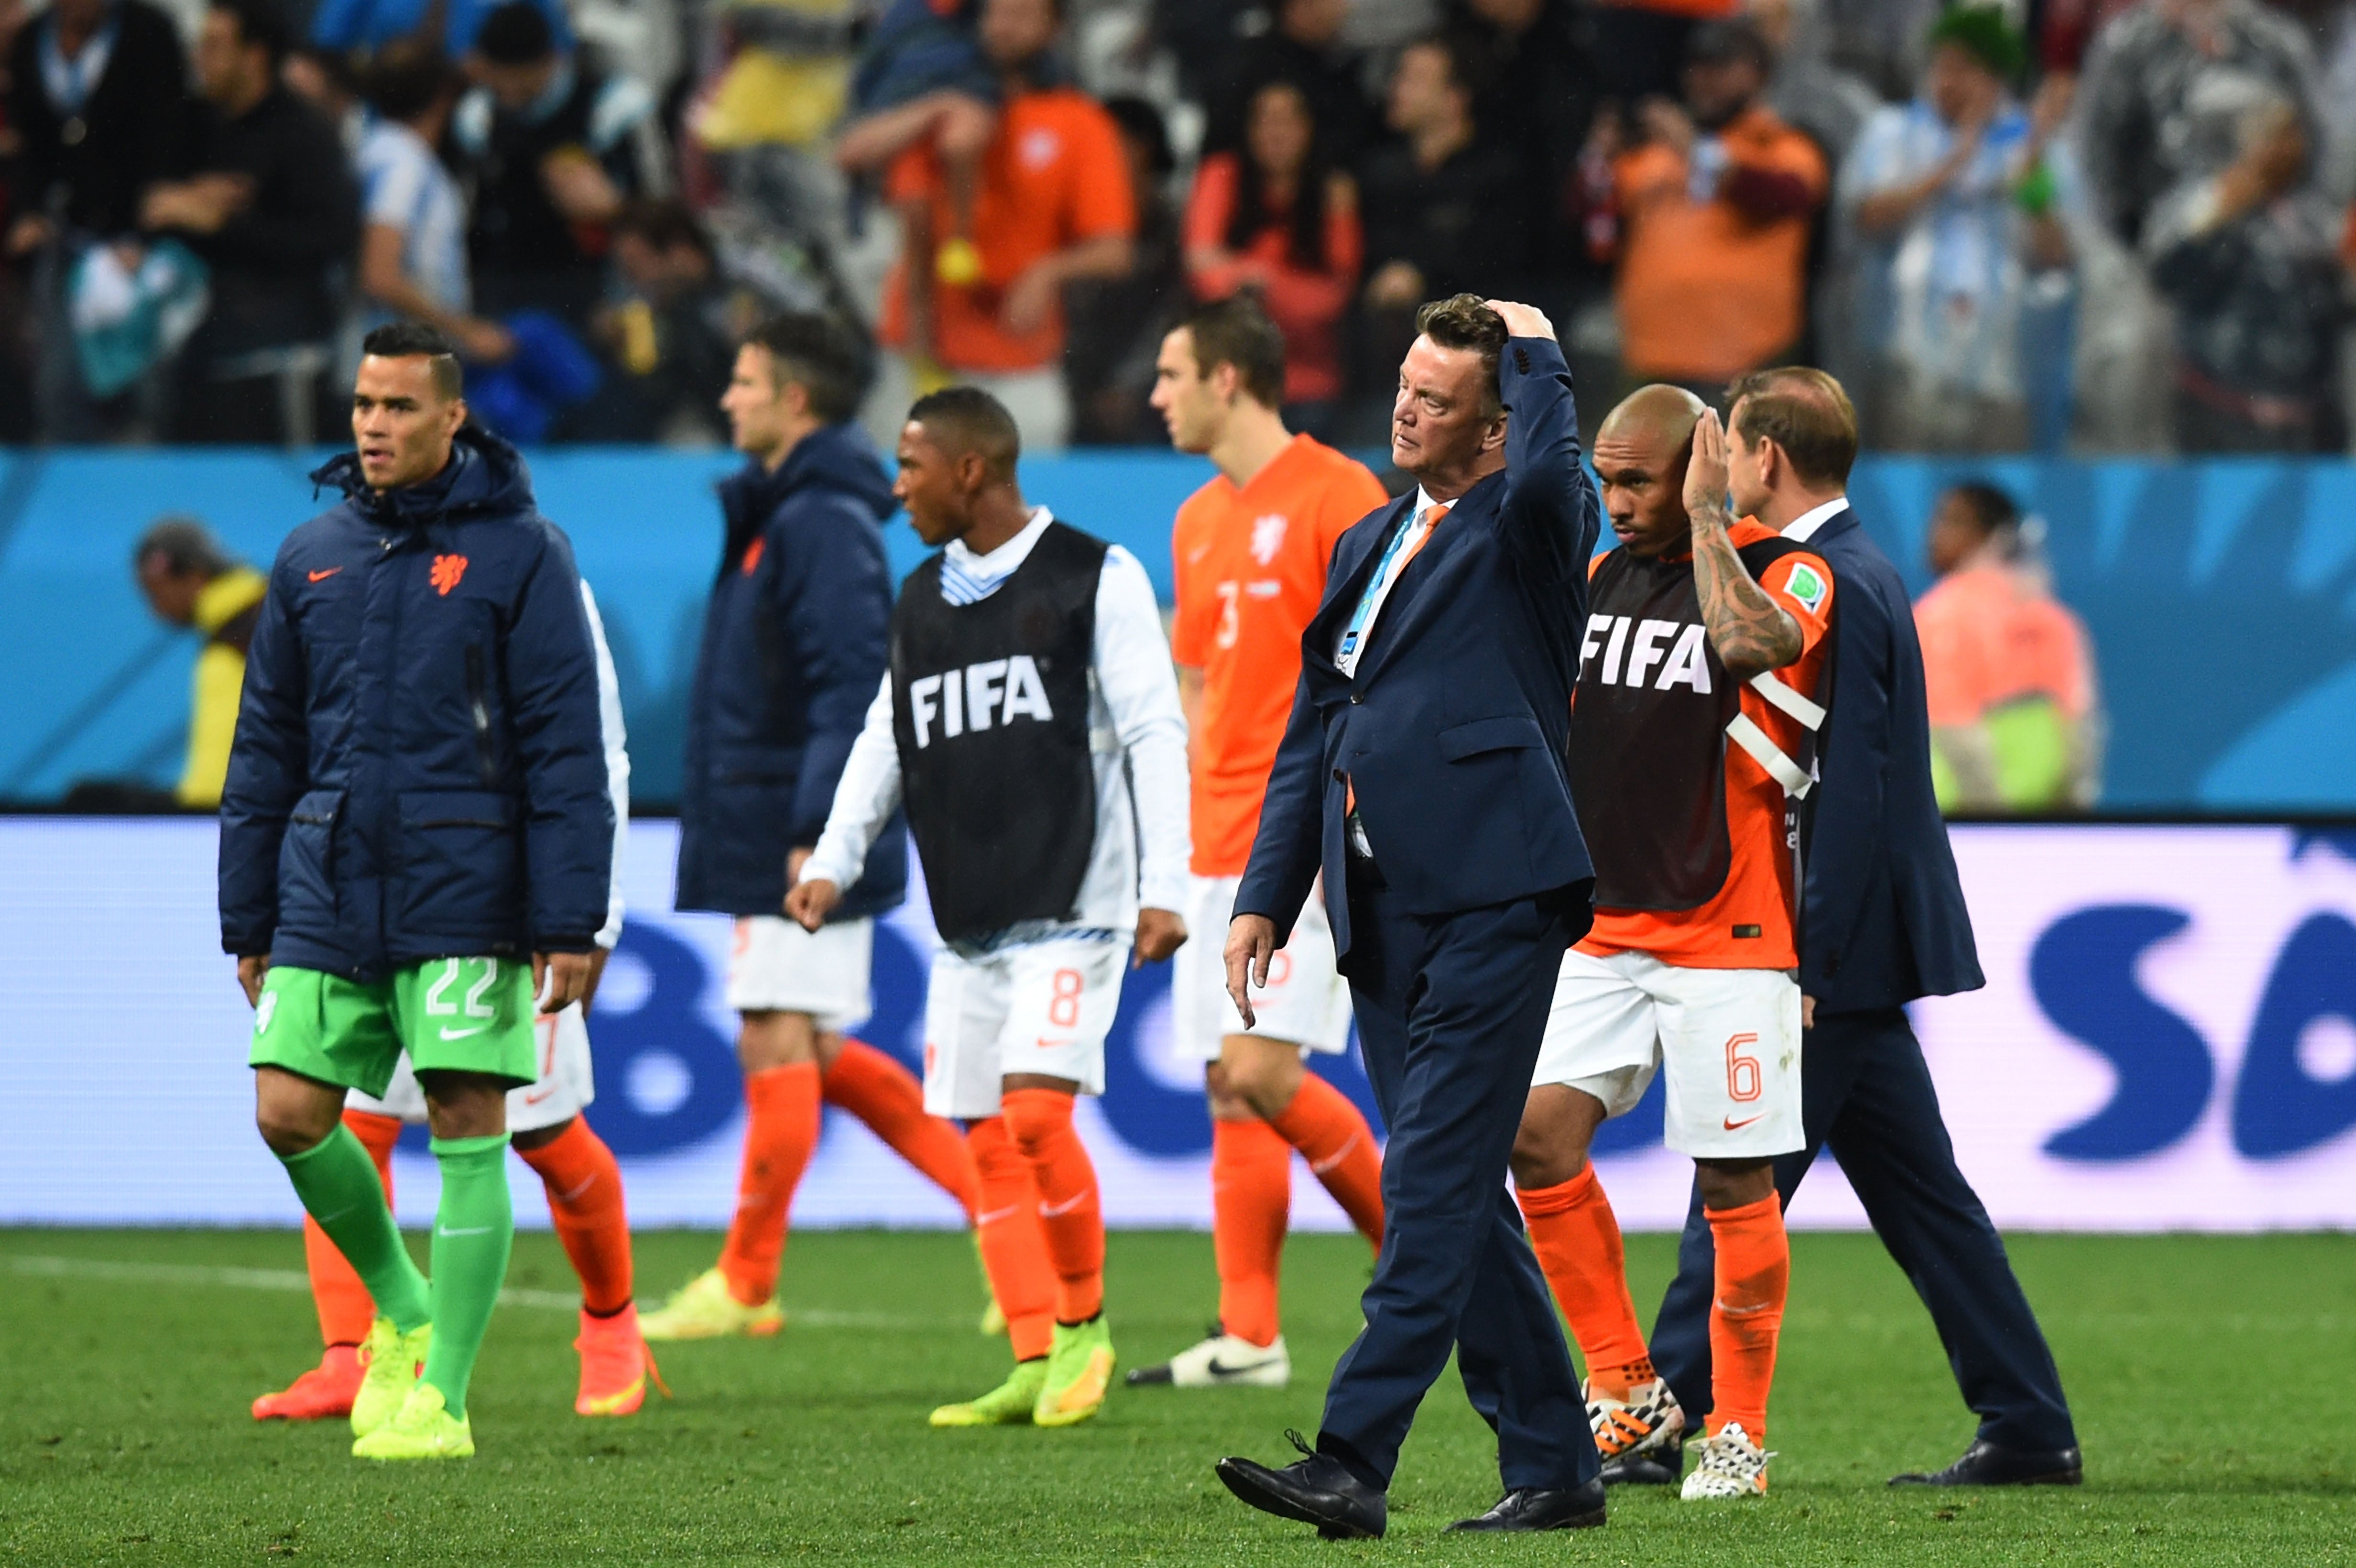 Louis van Gaal and his players after a shootout defeat by Argentina in the 2014 semi-finals